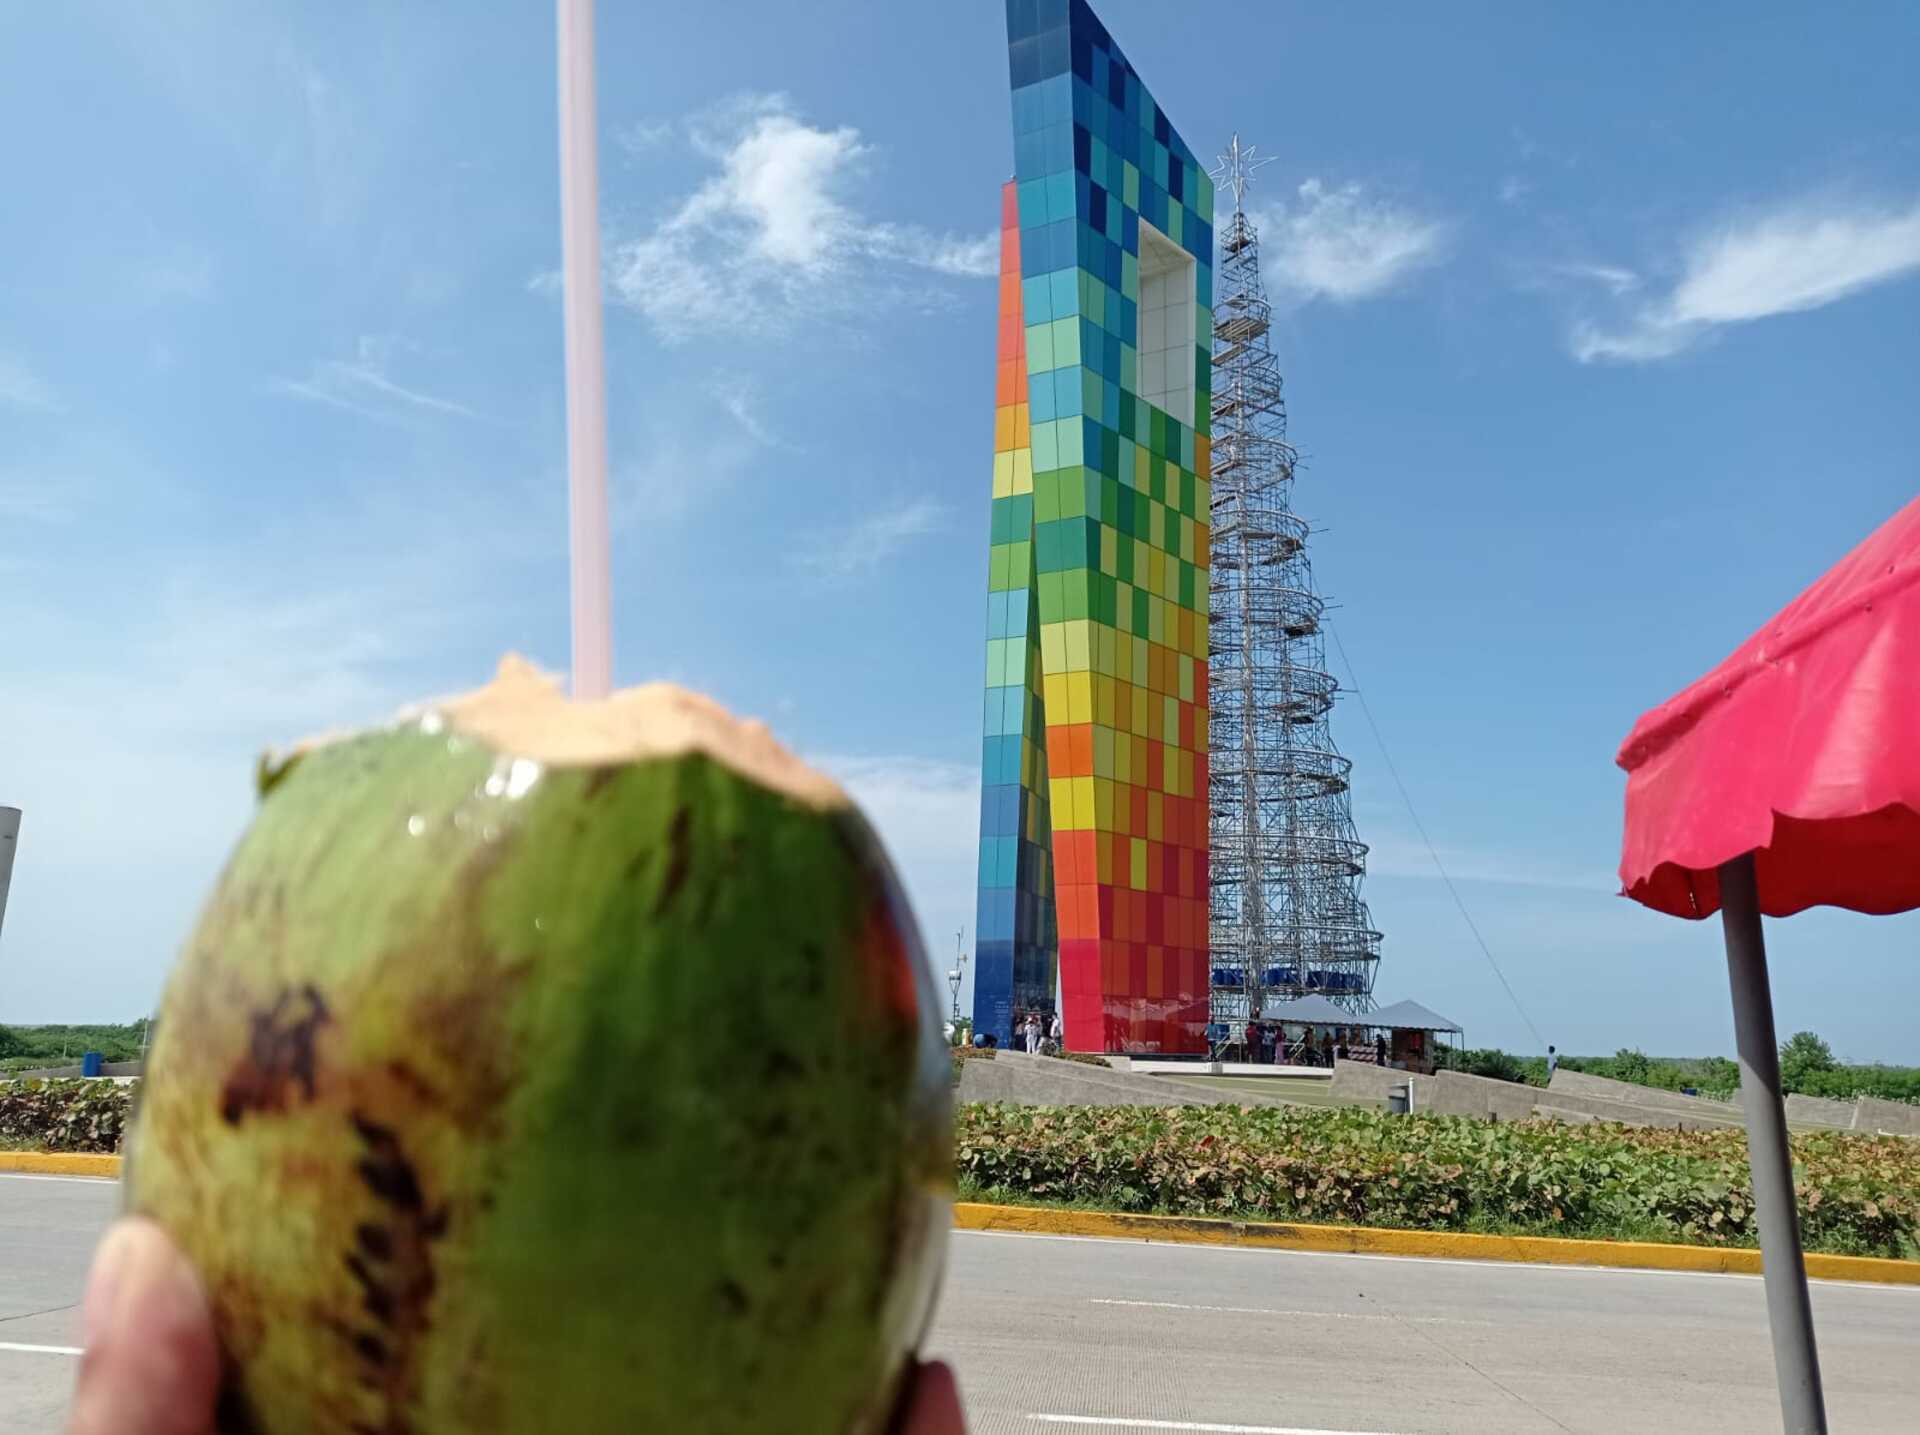 Food Tour in Barranquilla Downtown